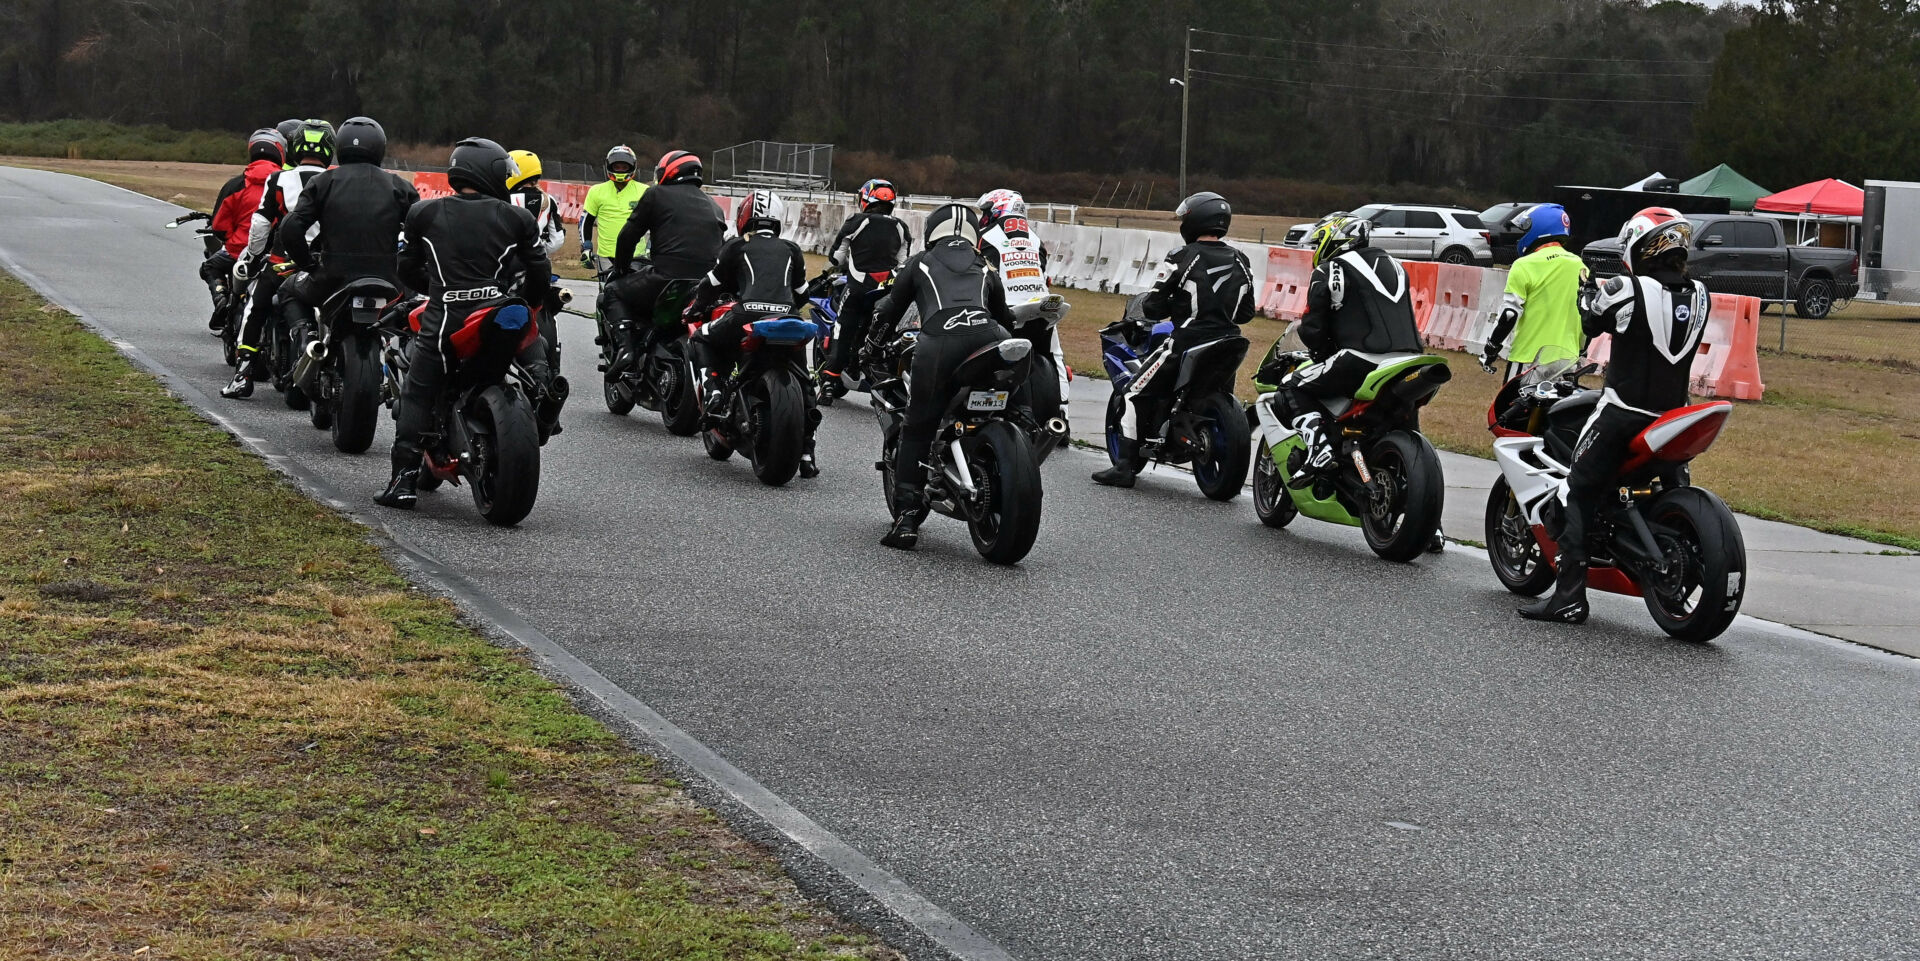 Riders lined up to go out on track at a Precision Track Days event. Photo courtesy Precision Track Days.